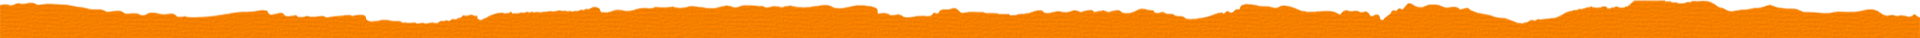 A picture of an orange background with a black and white image.